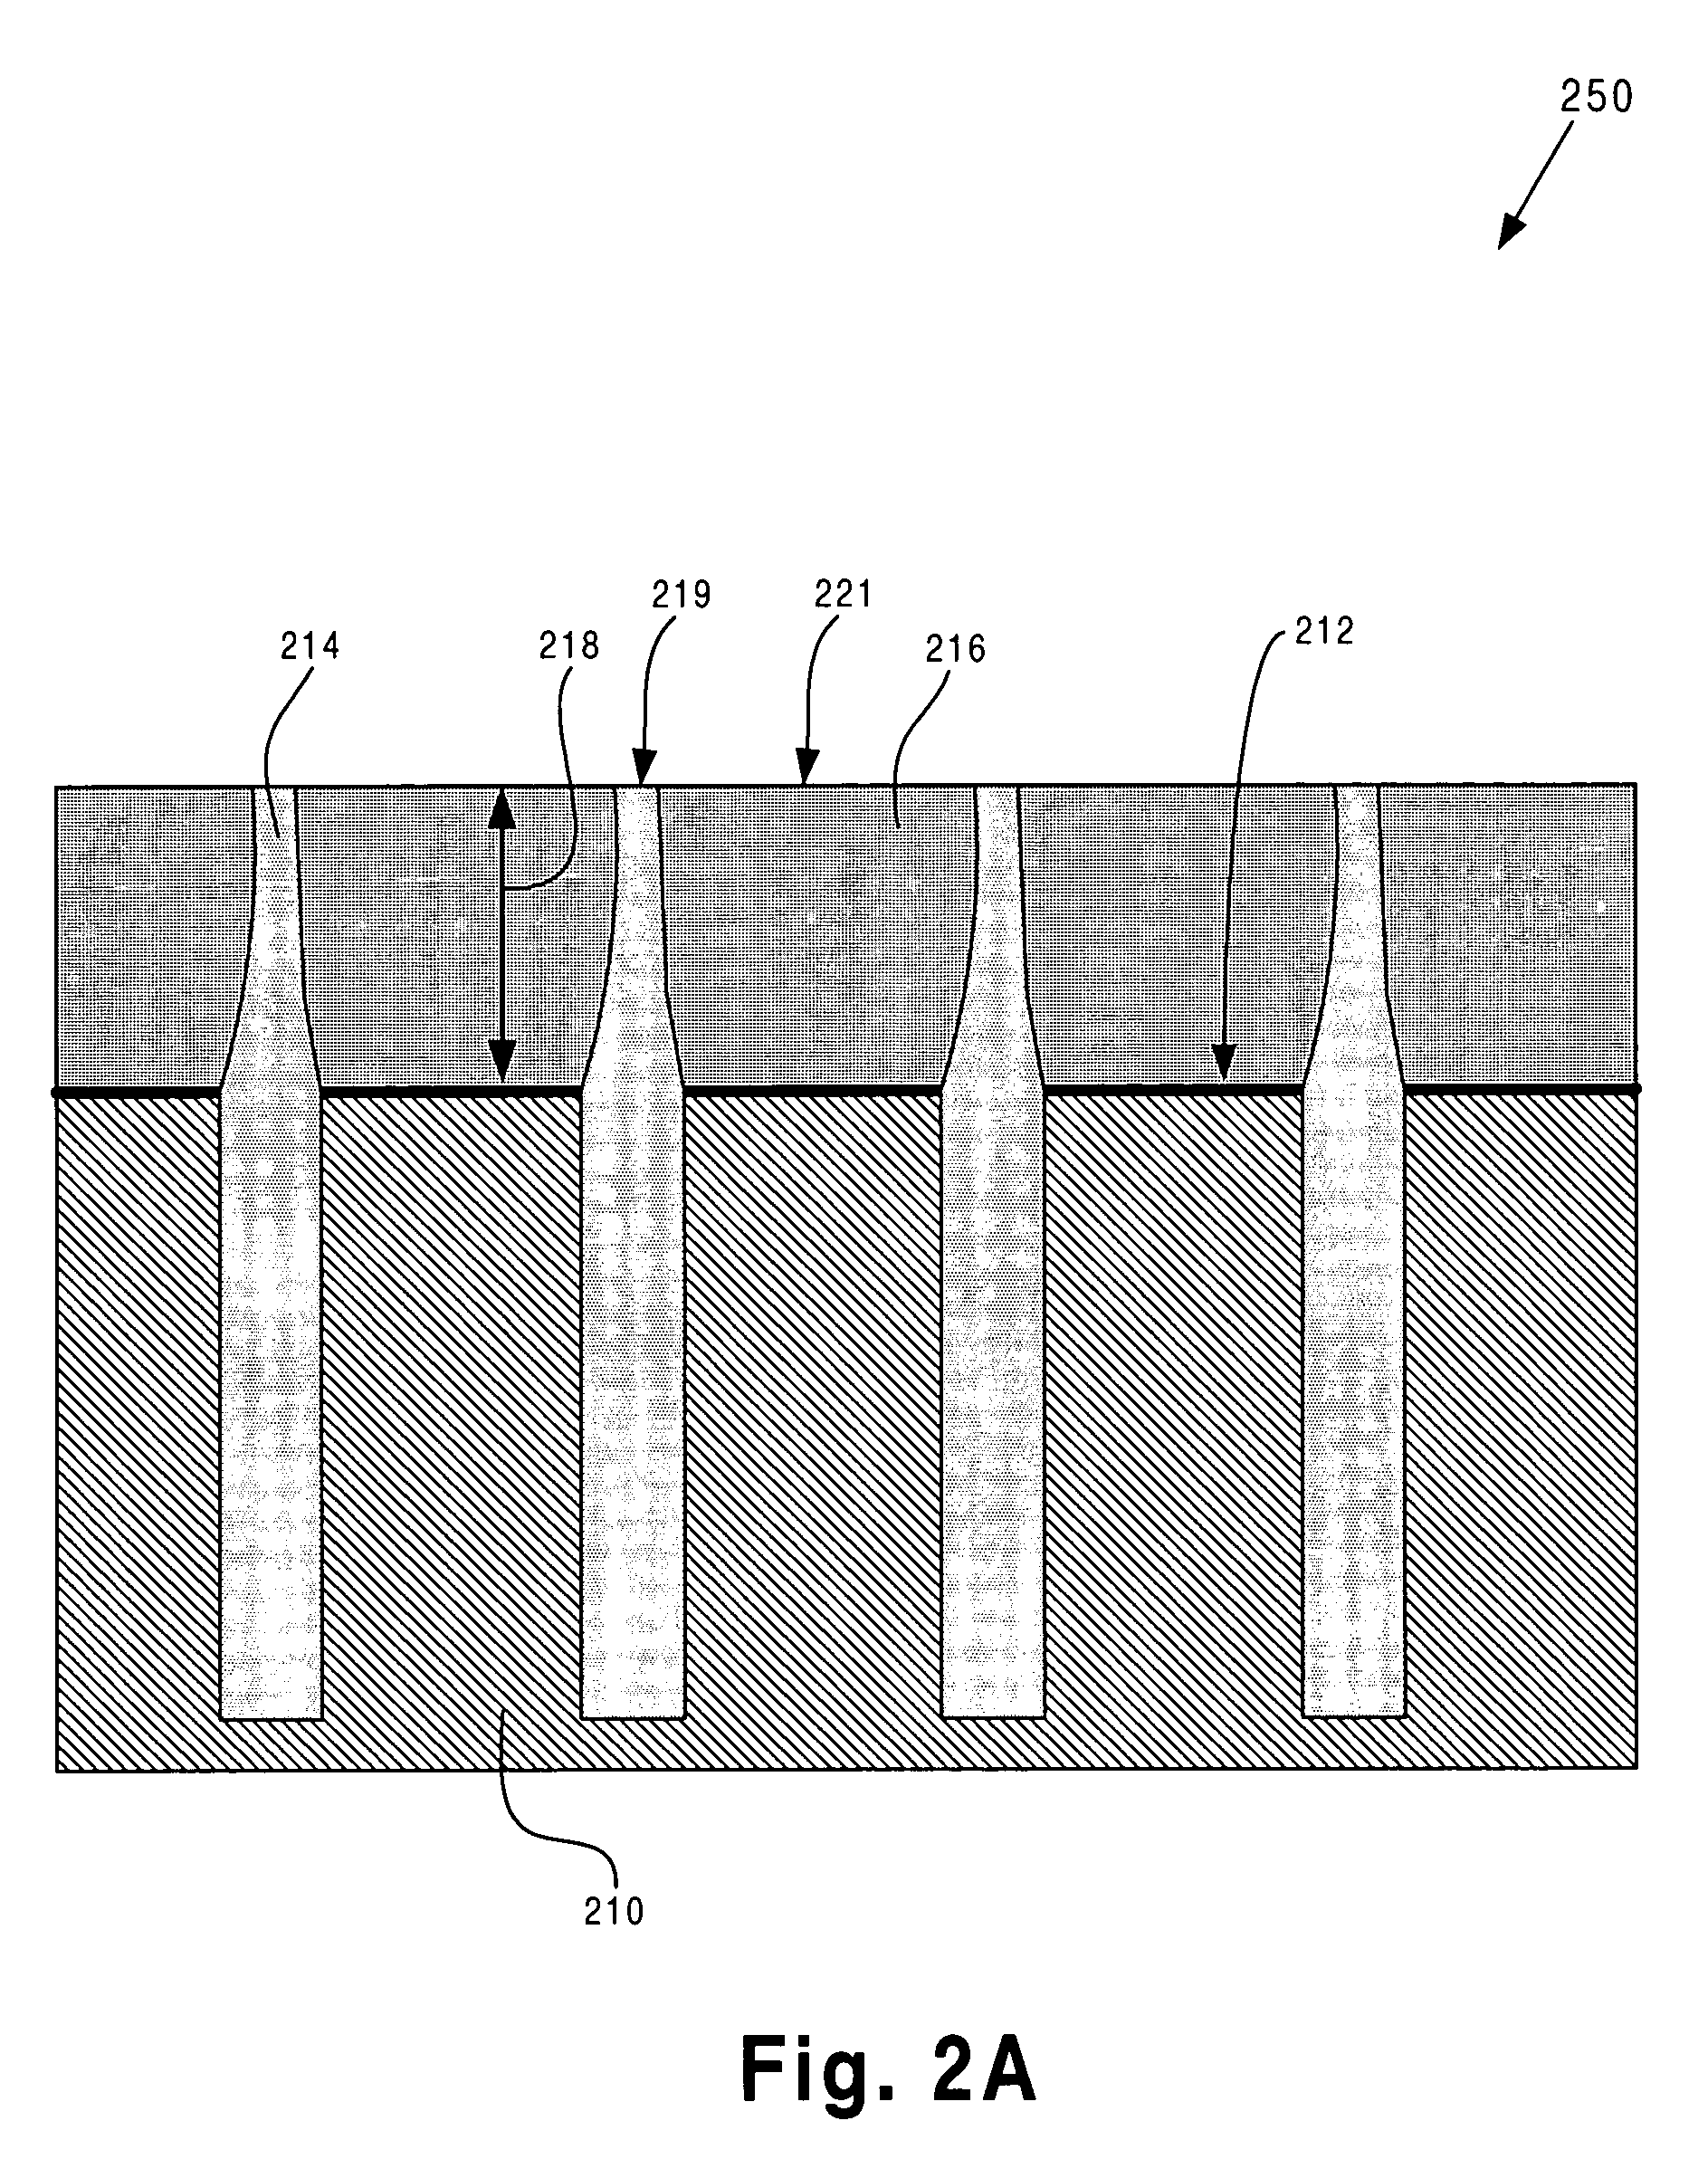 Method for controlling poly 1 thickness and uniformity in a memory array fabrication process